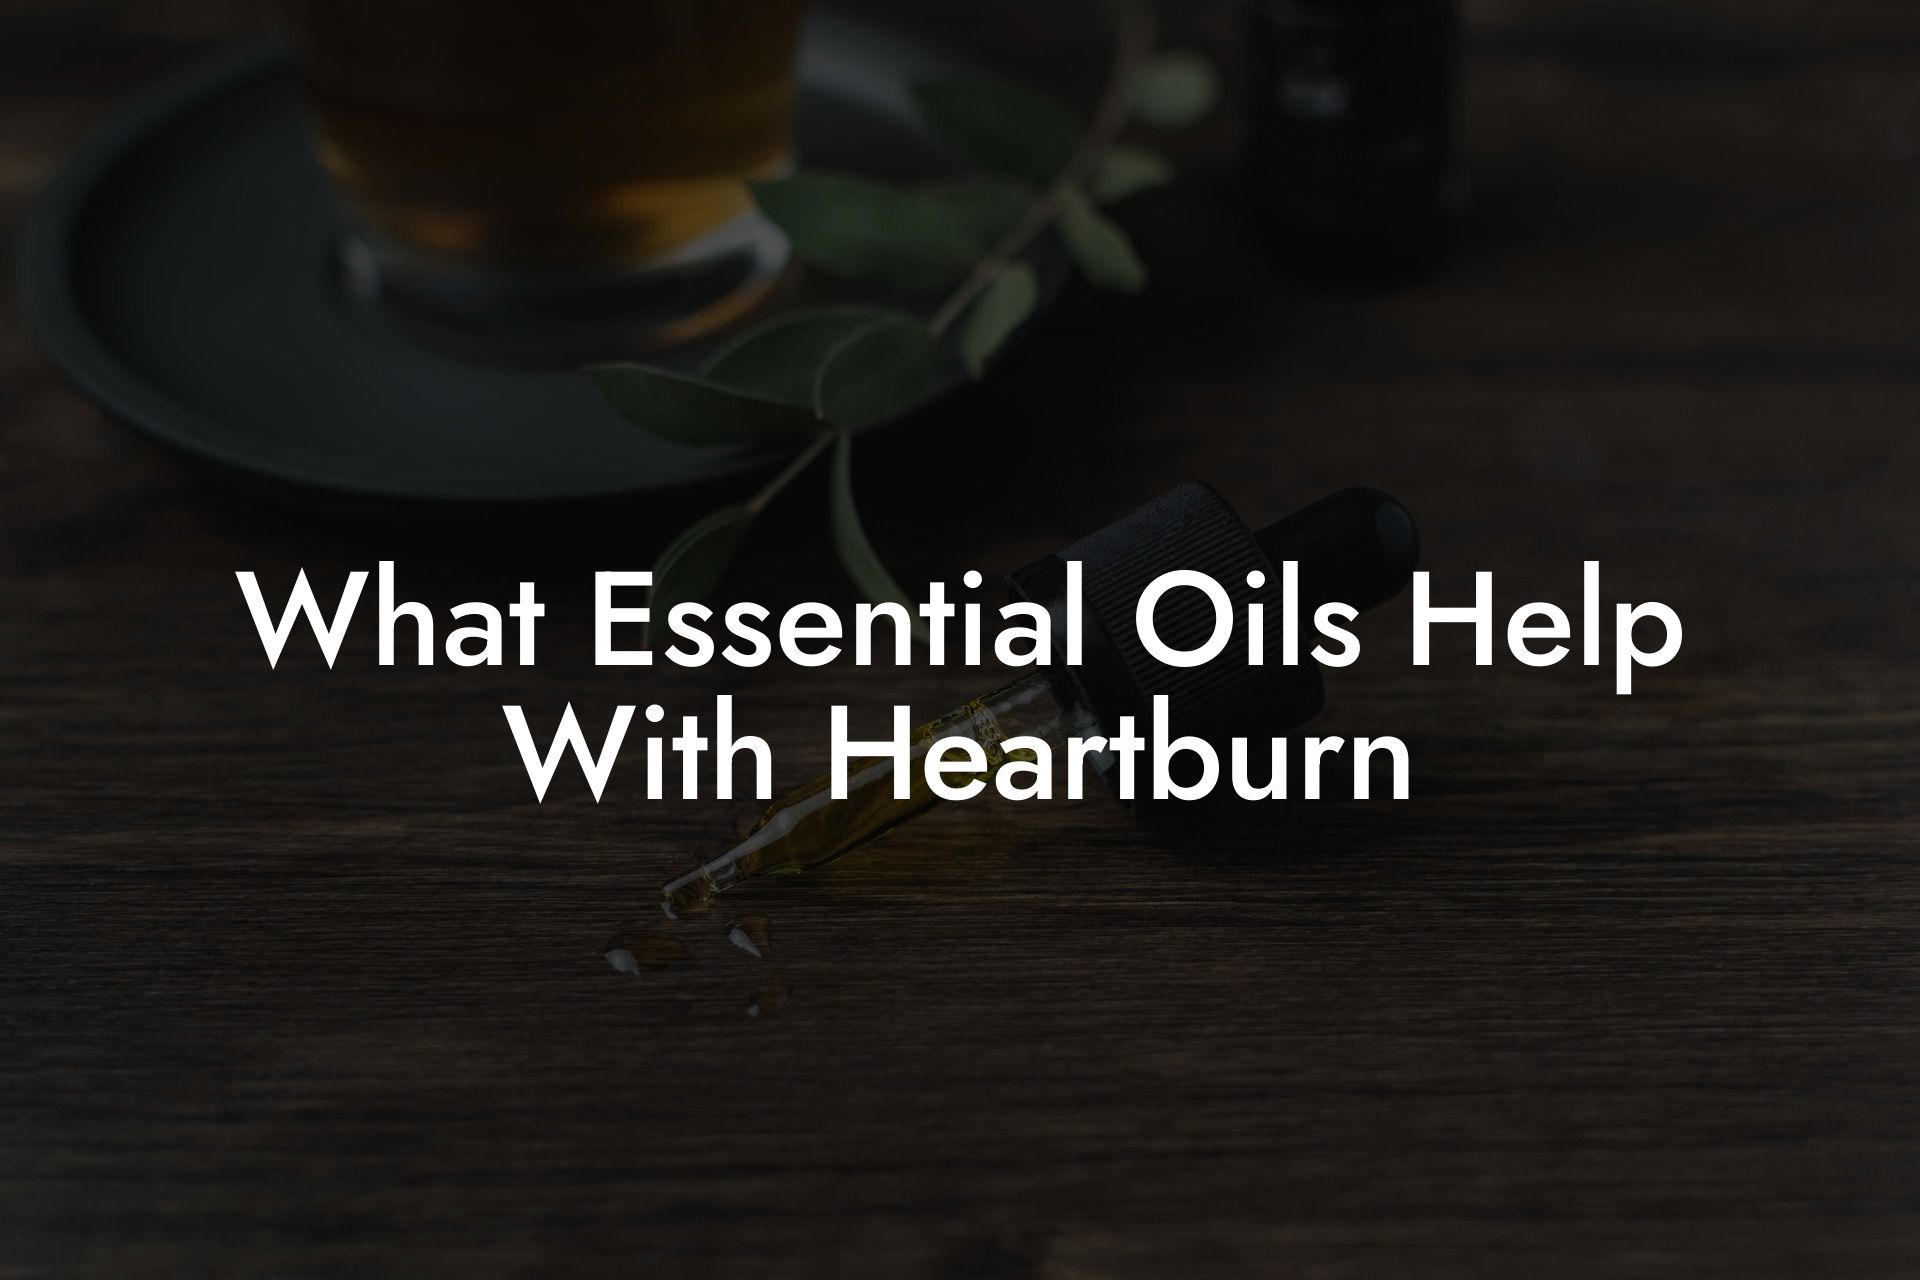 What Essential Oils Help With Heartburn